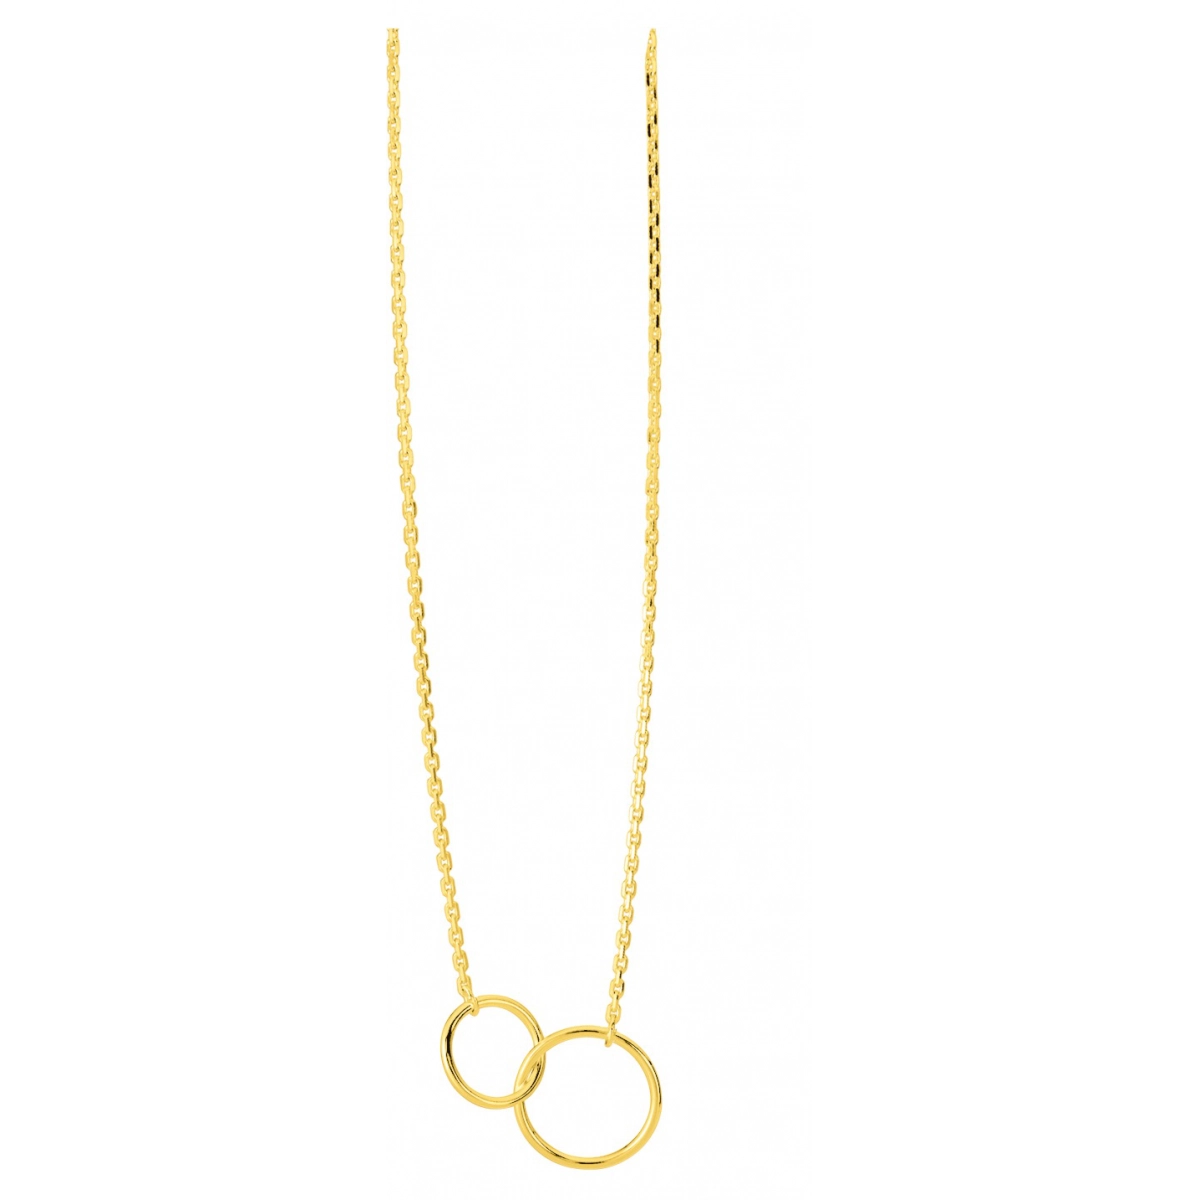 Collier plaqué or - Taille: 42  Lua Blanca  132072.42